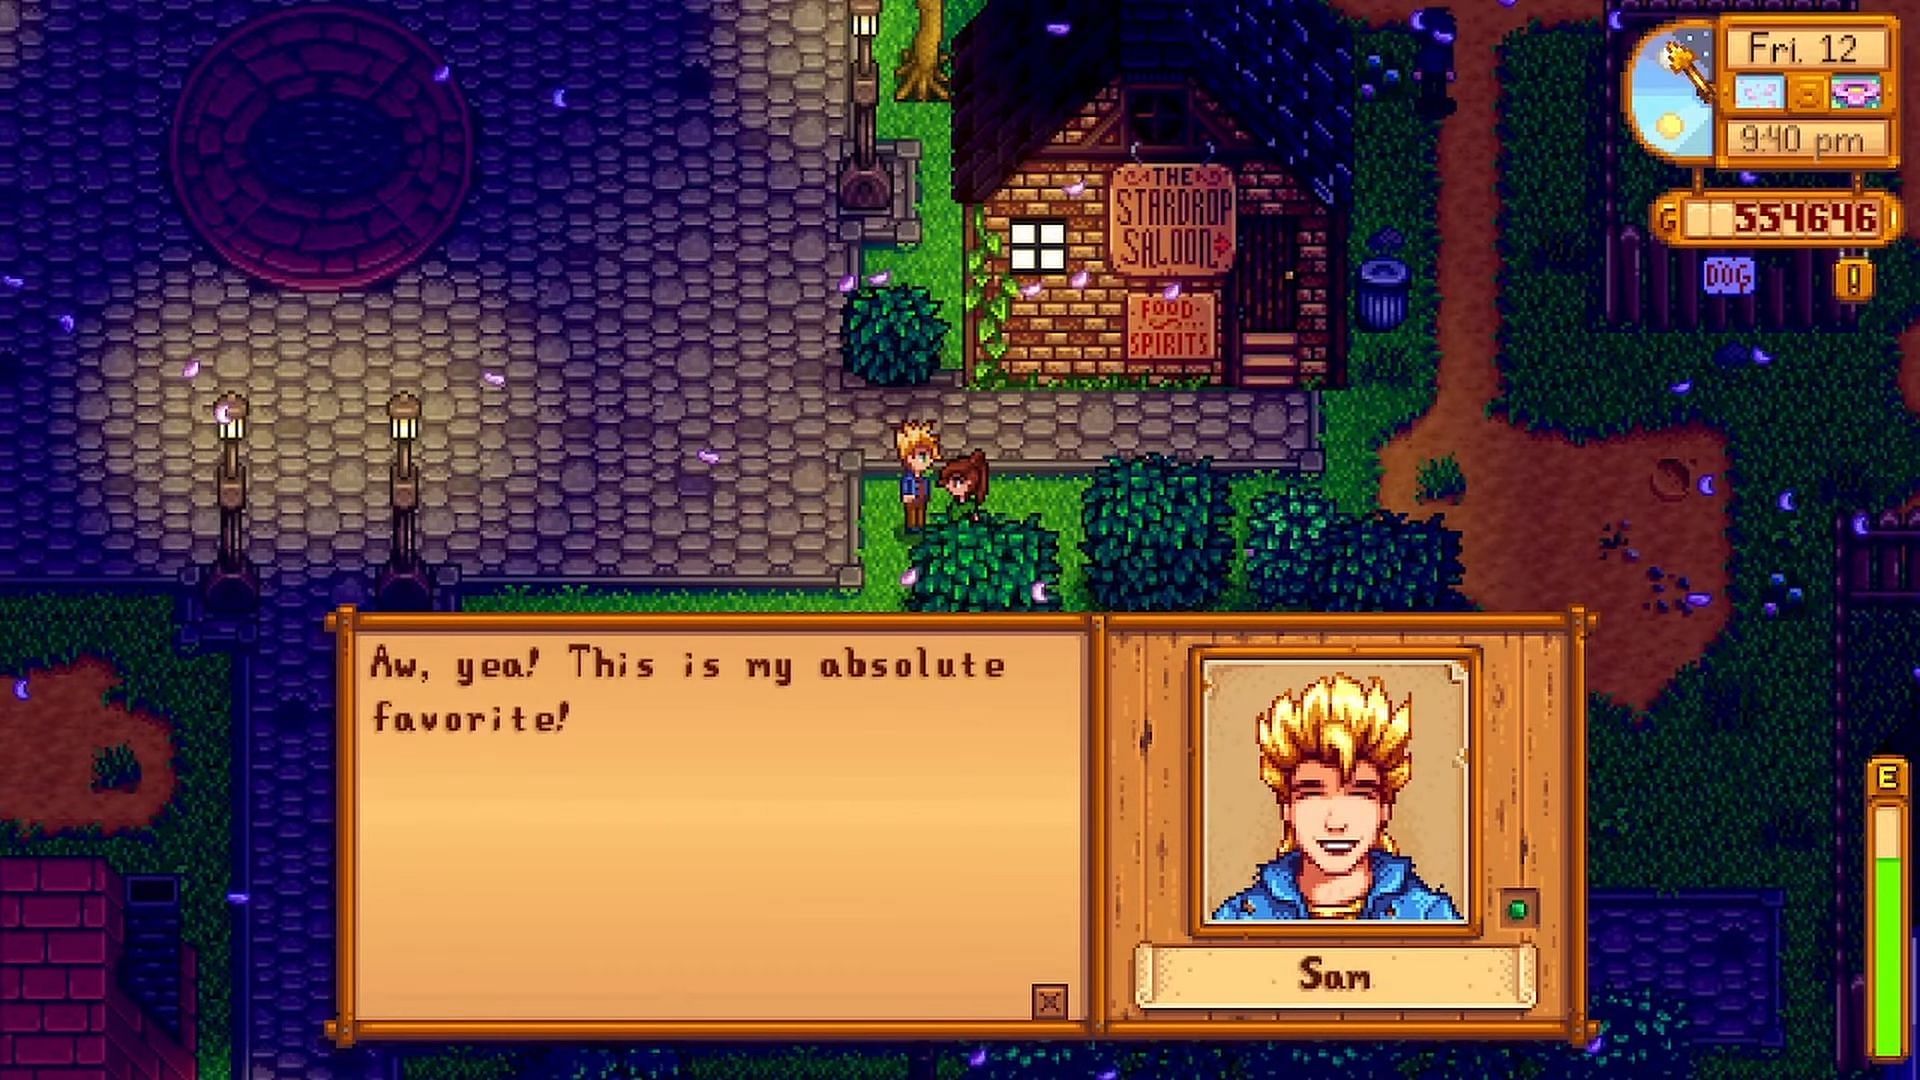 Make sure to gift people or talk to them if you want to take them to the Stardew Valley Flower Dance (Image via ConcernedApe II Cozy Bird Gaming on YouTube)